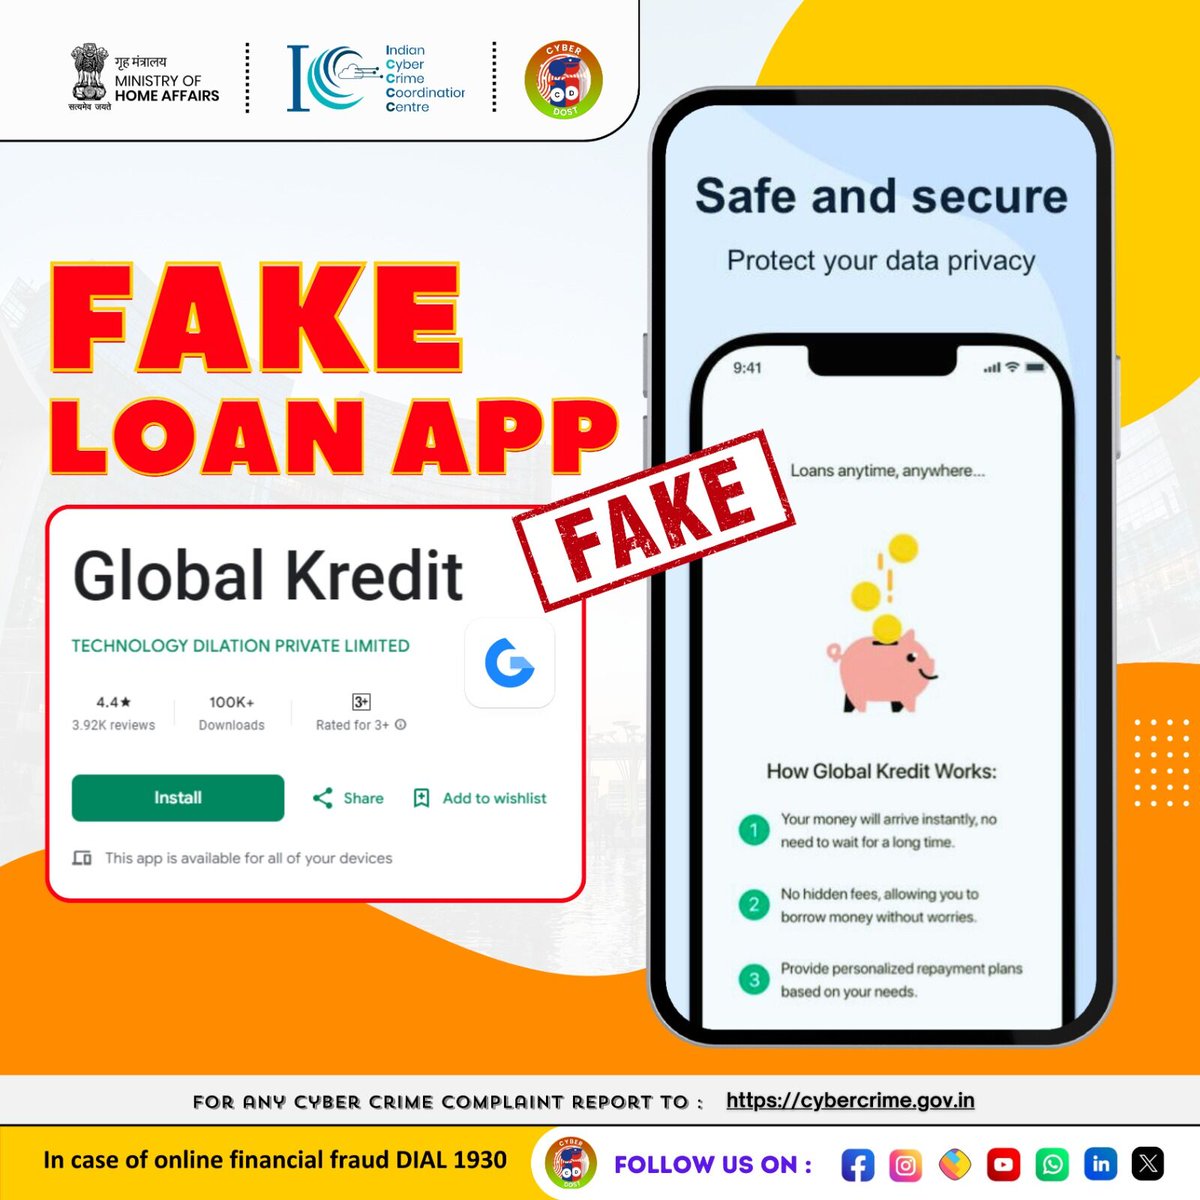 Don’t get lured by quick cash! Stay vigilant against fake loan apps. #CyberSmart #FraudAlert #StaySafeOnline #CyberSafeIndia #CyberAware #StayCyberWise #I4C #MHA #fraud #newsfeed